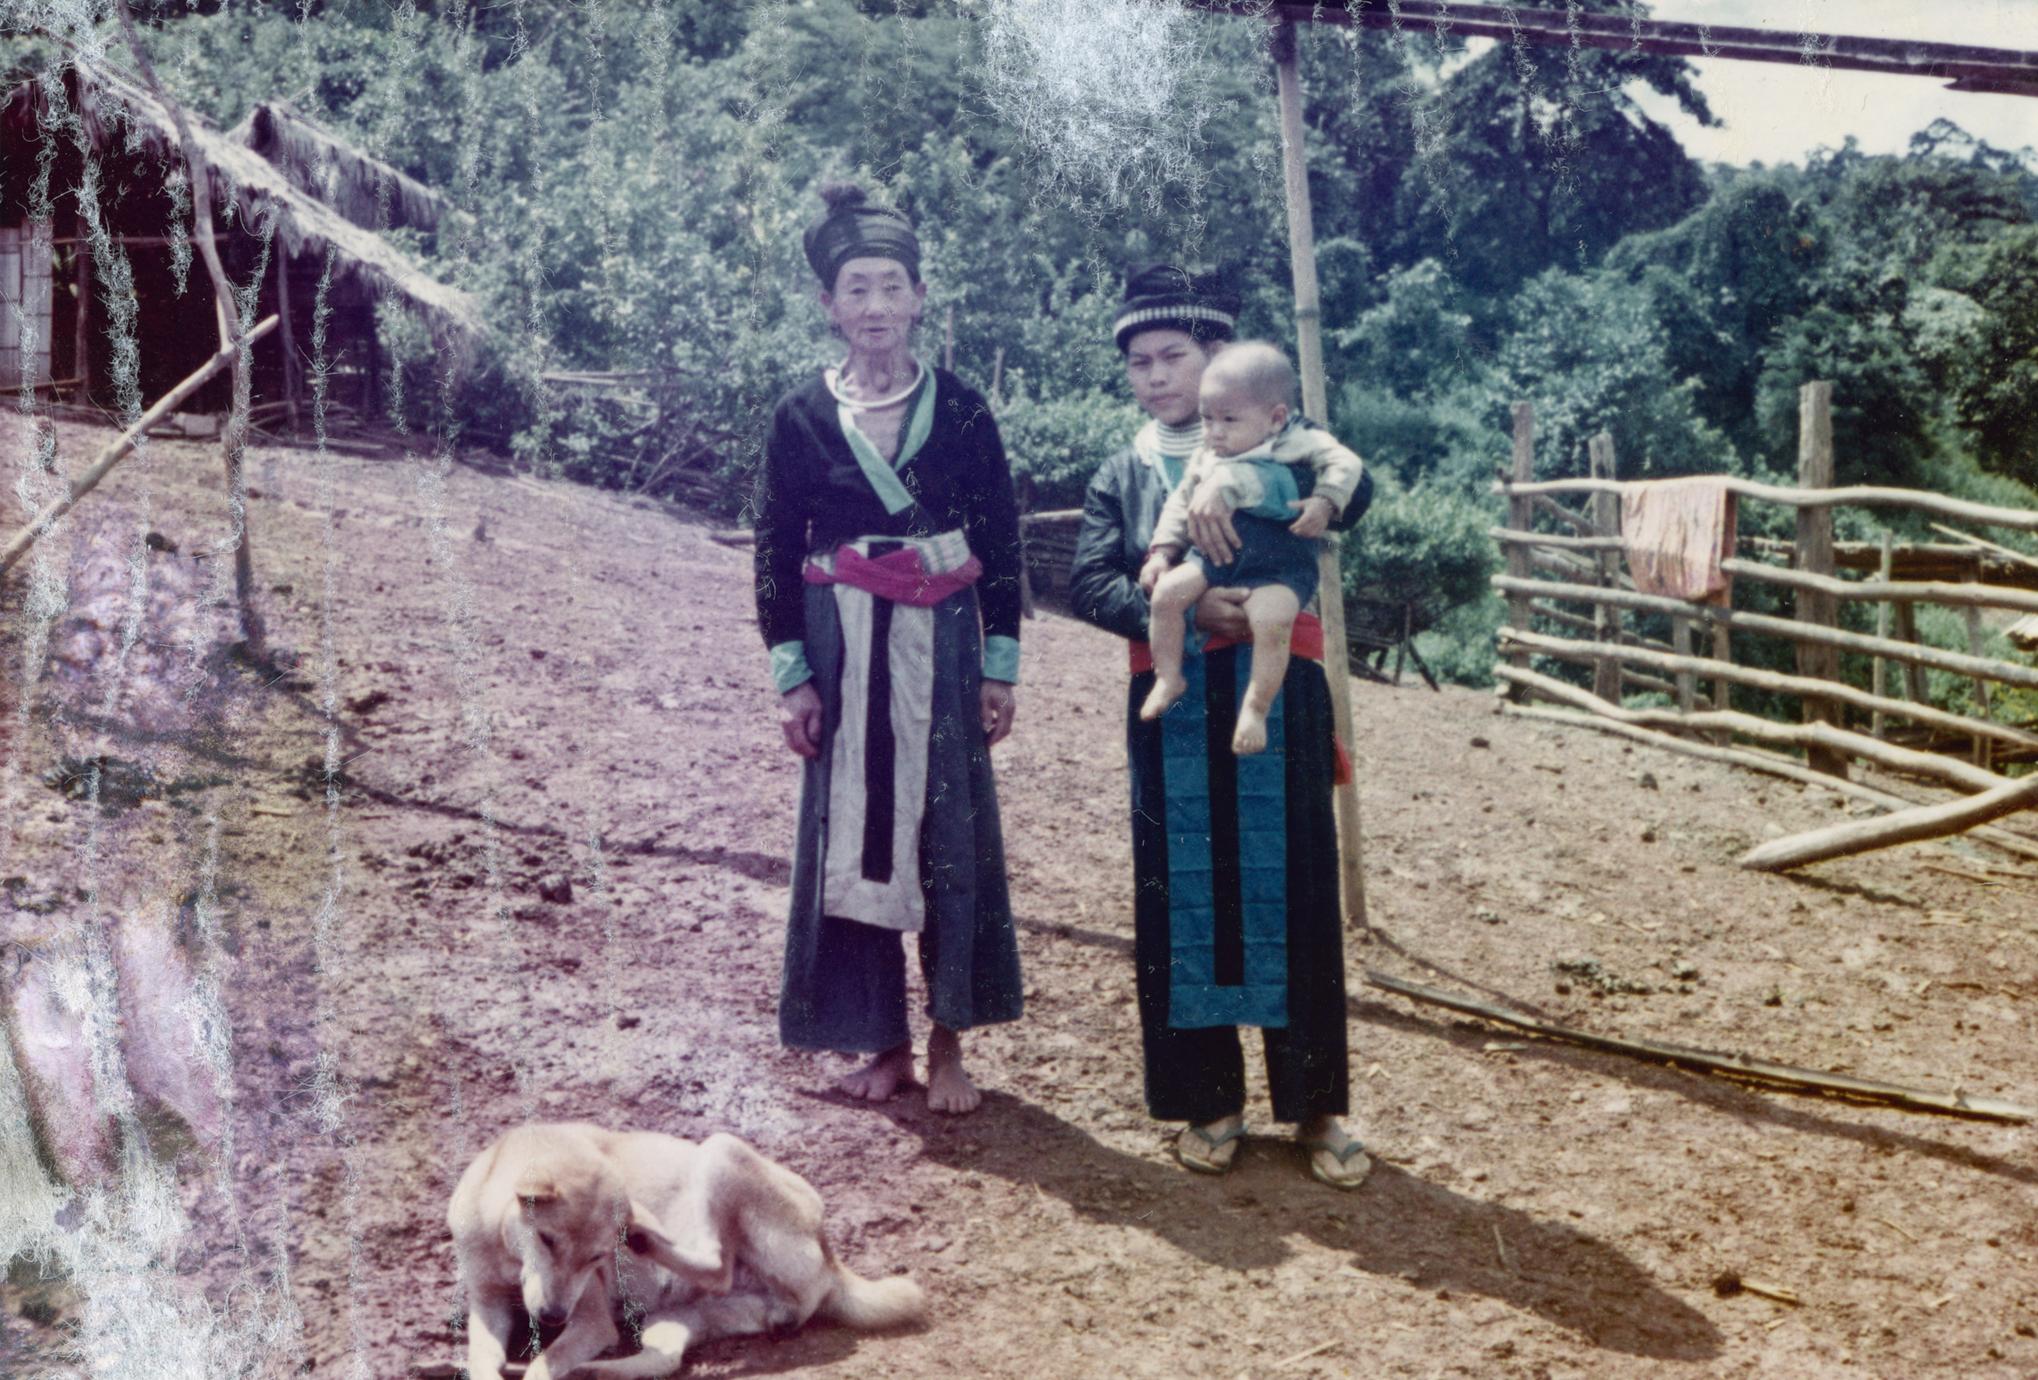 A White Hmong woman, baby and dog in Houa Khong Province